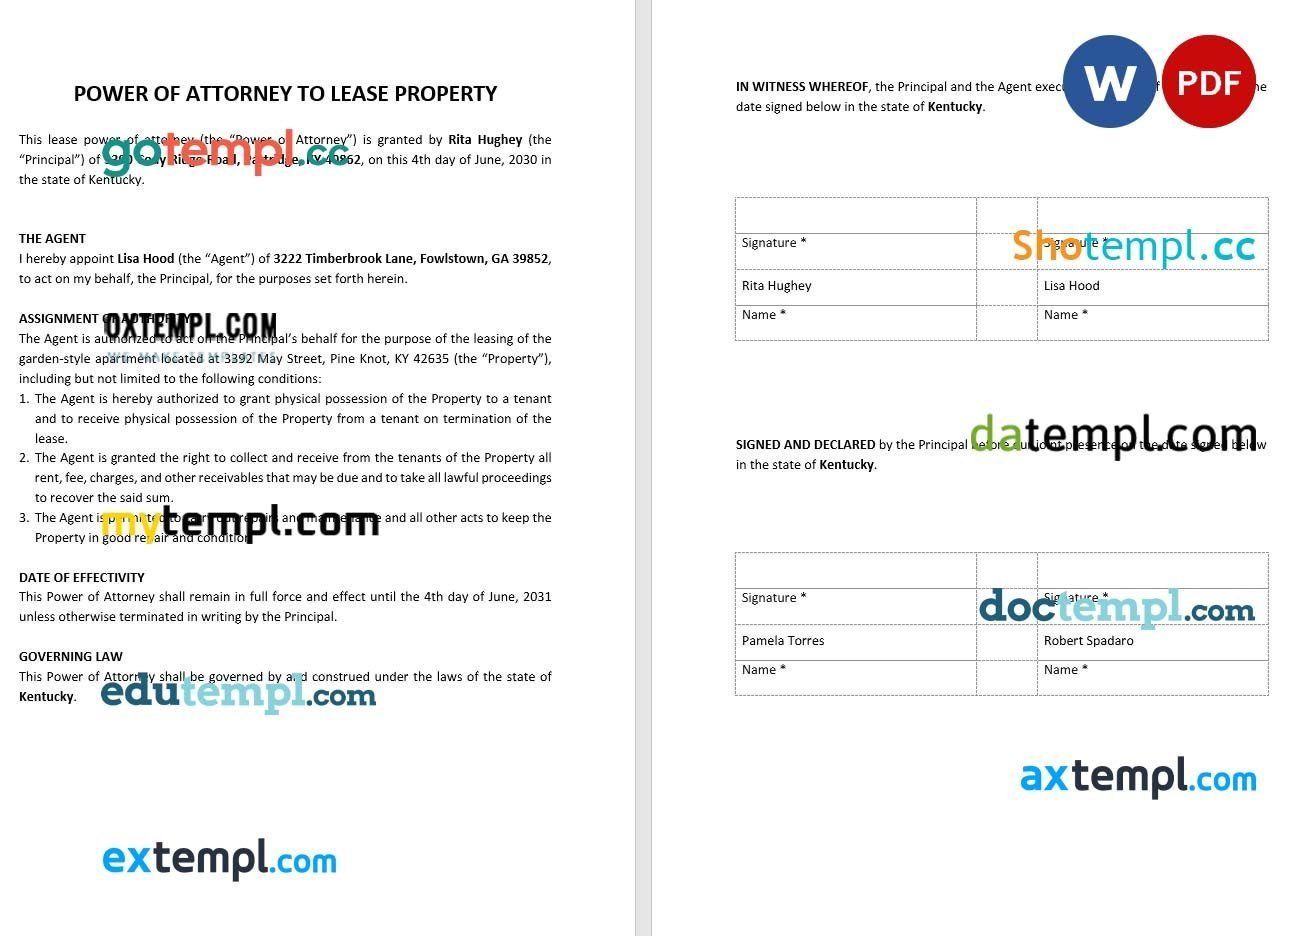 Power of Attorney to Lease Property example, fully editable